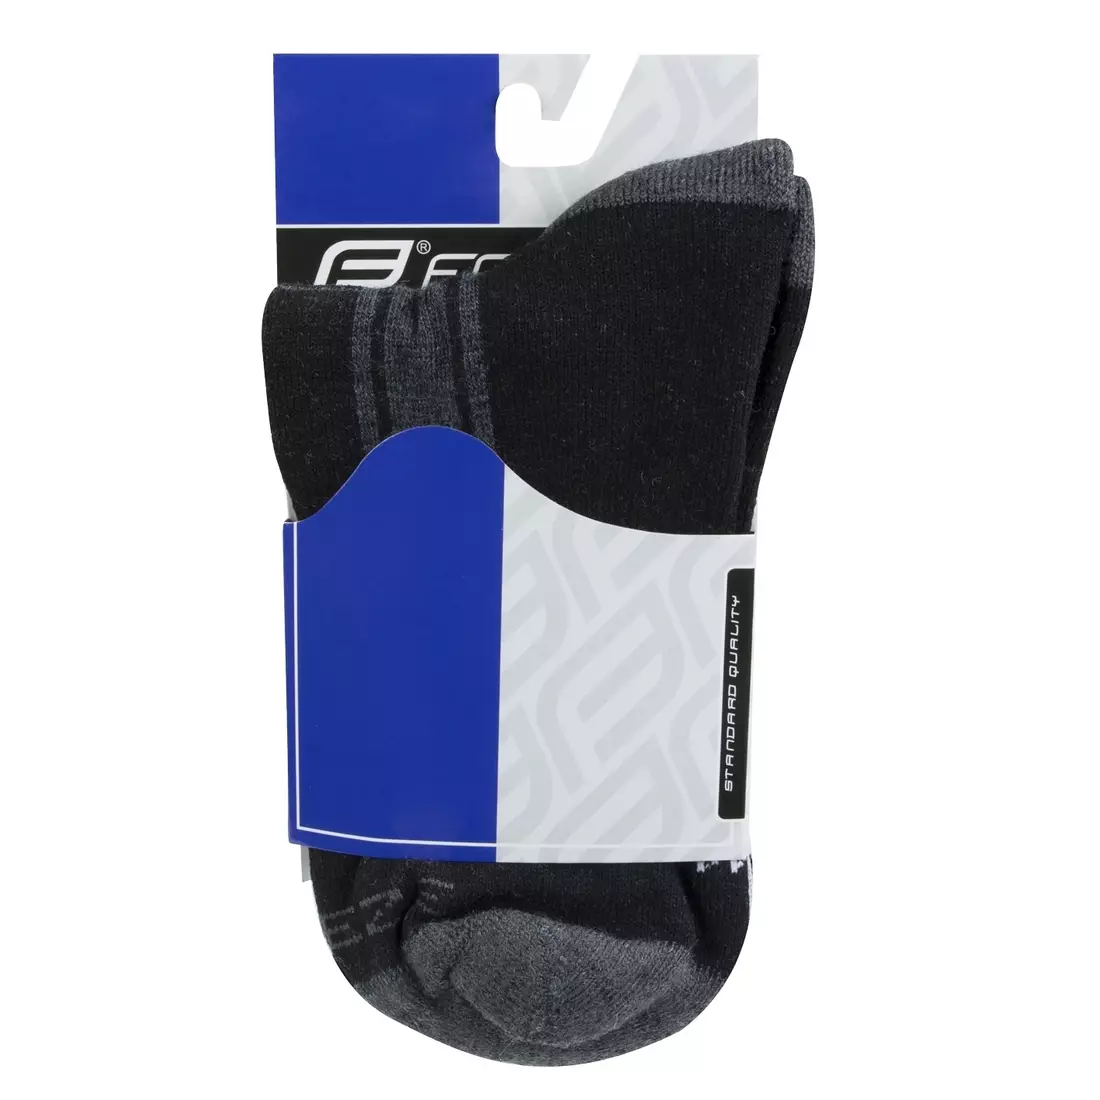 FORCE FREEZE winter cycling socks, gray, black and white